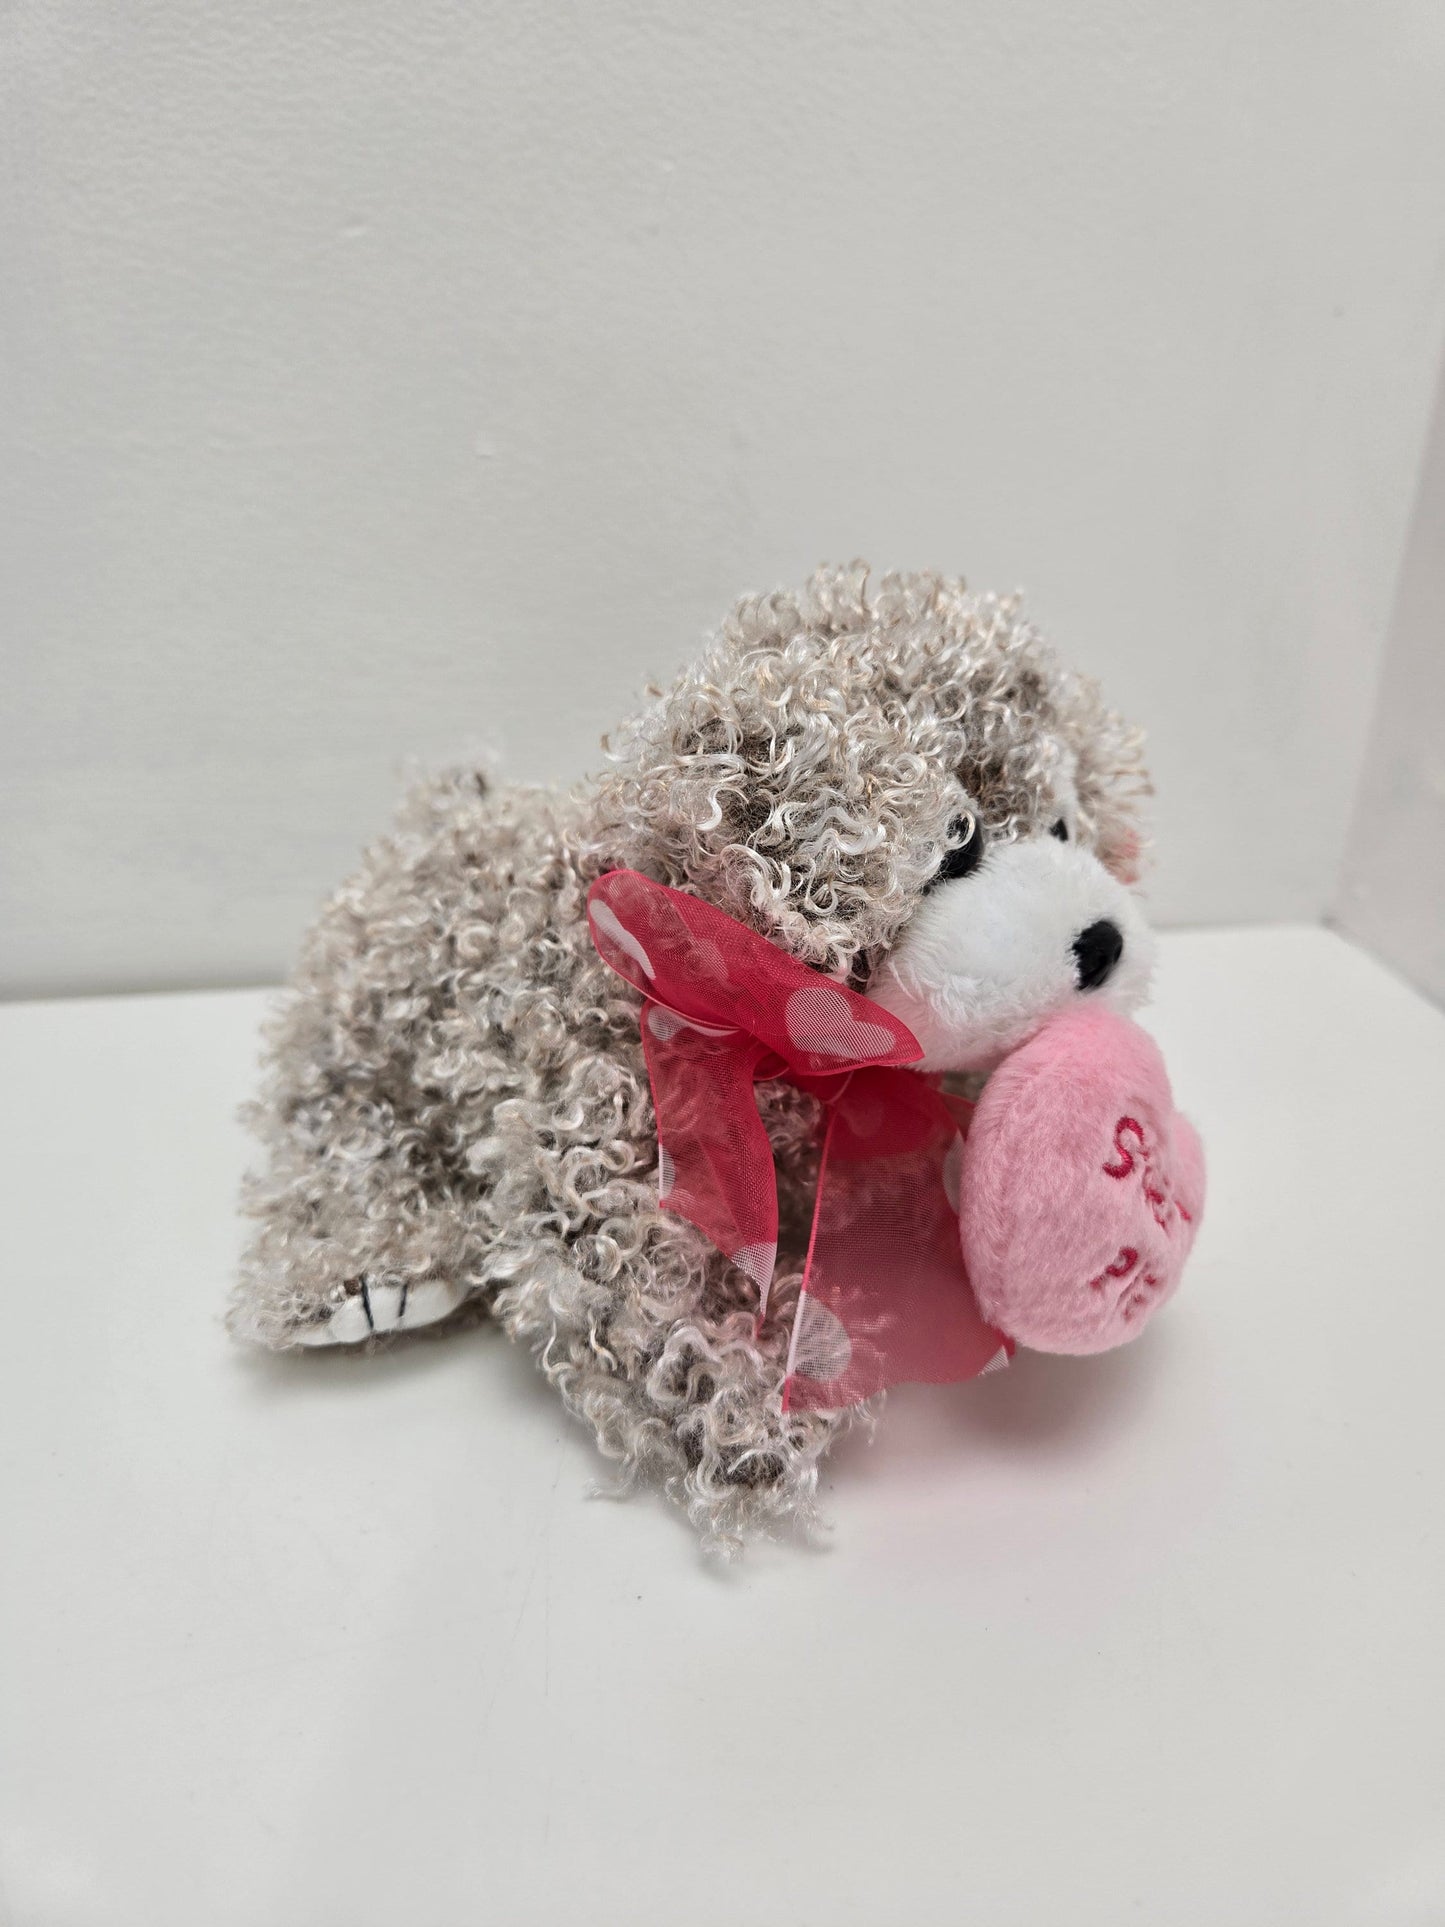 Ty Beanie Baby “Snookums” the Dog Plush Holding a Heart that says Sweetie Pie!  (6 inch)